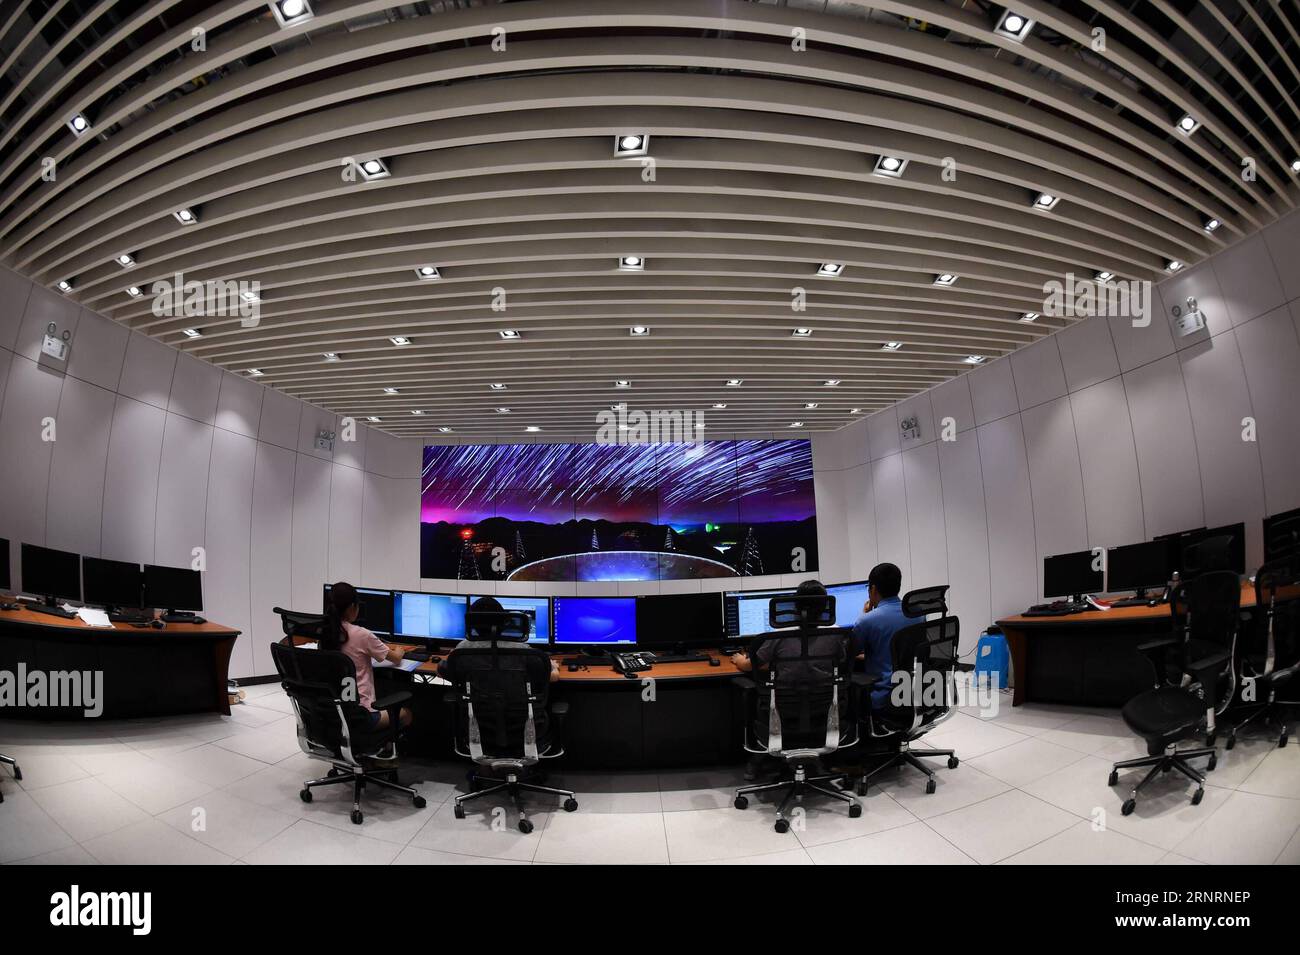 (171010) -- GUIYANG, Oct. 10, 2017 -- Staff members work in the control room of the Five-hundred-meter Aperture Spherical Telescope (FAST) in Pingtang County, southwest China s Guizhou Province, Aug. 9, 2017. The China-based FAST, the world s largest single-dish radio telescope, has identified two pulsars after one year of trial operation, the National Astronomical Observatories of China (NAOC) said on Oct. 10, 2017. ) (ry) CHINA-FAST TELESCOPE-PULSARS (CN) OuxDongqu PUBLICATIONxNOTxINxCHN Stock Photo